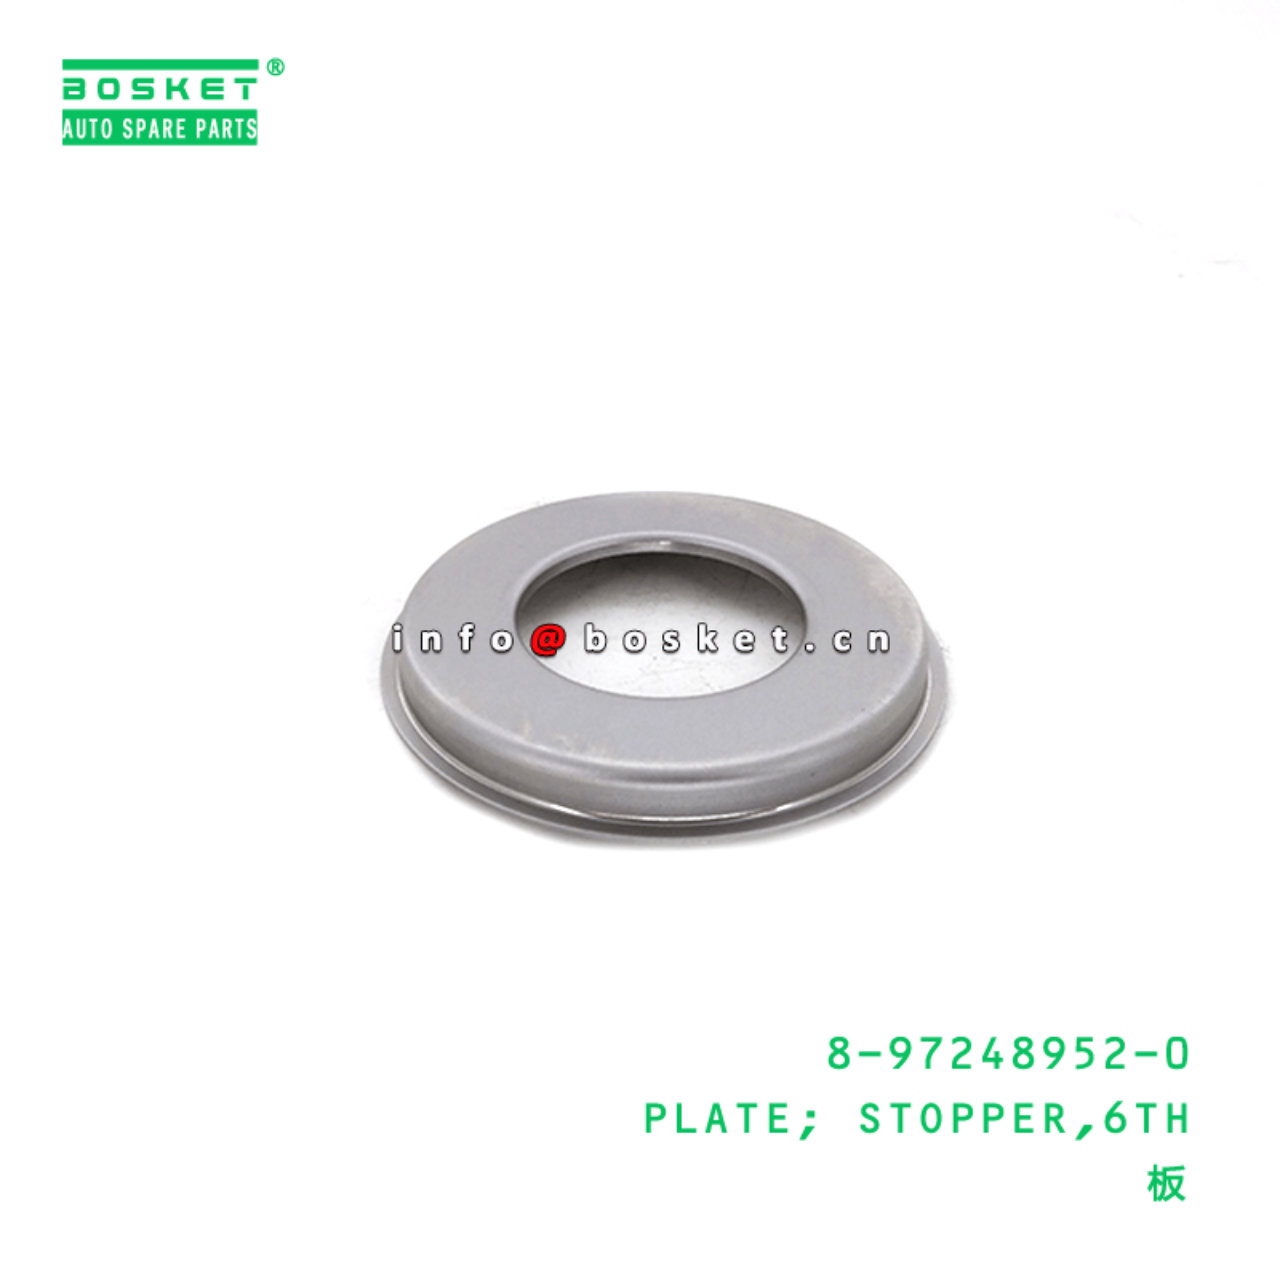 8-97248952-0 Sixth Stopper Plate 8972489520 Suitable for ISUZU NKR 